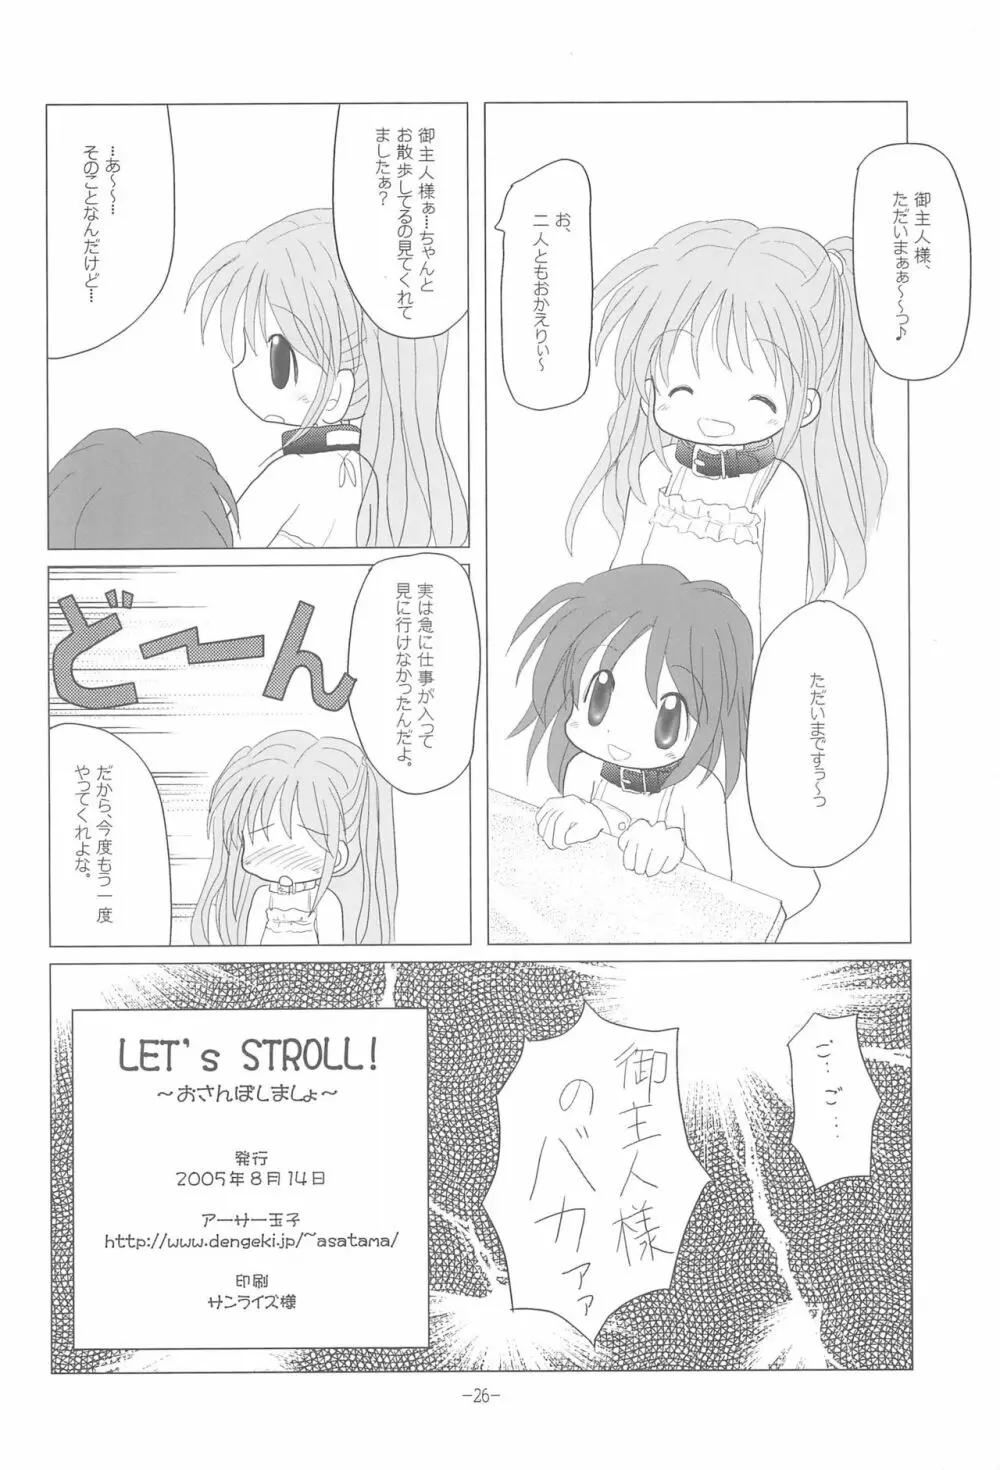 LET's STROLL! ~おさんぽしましょ~ Page.26